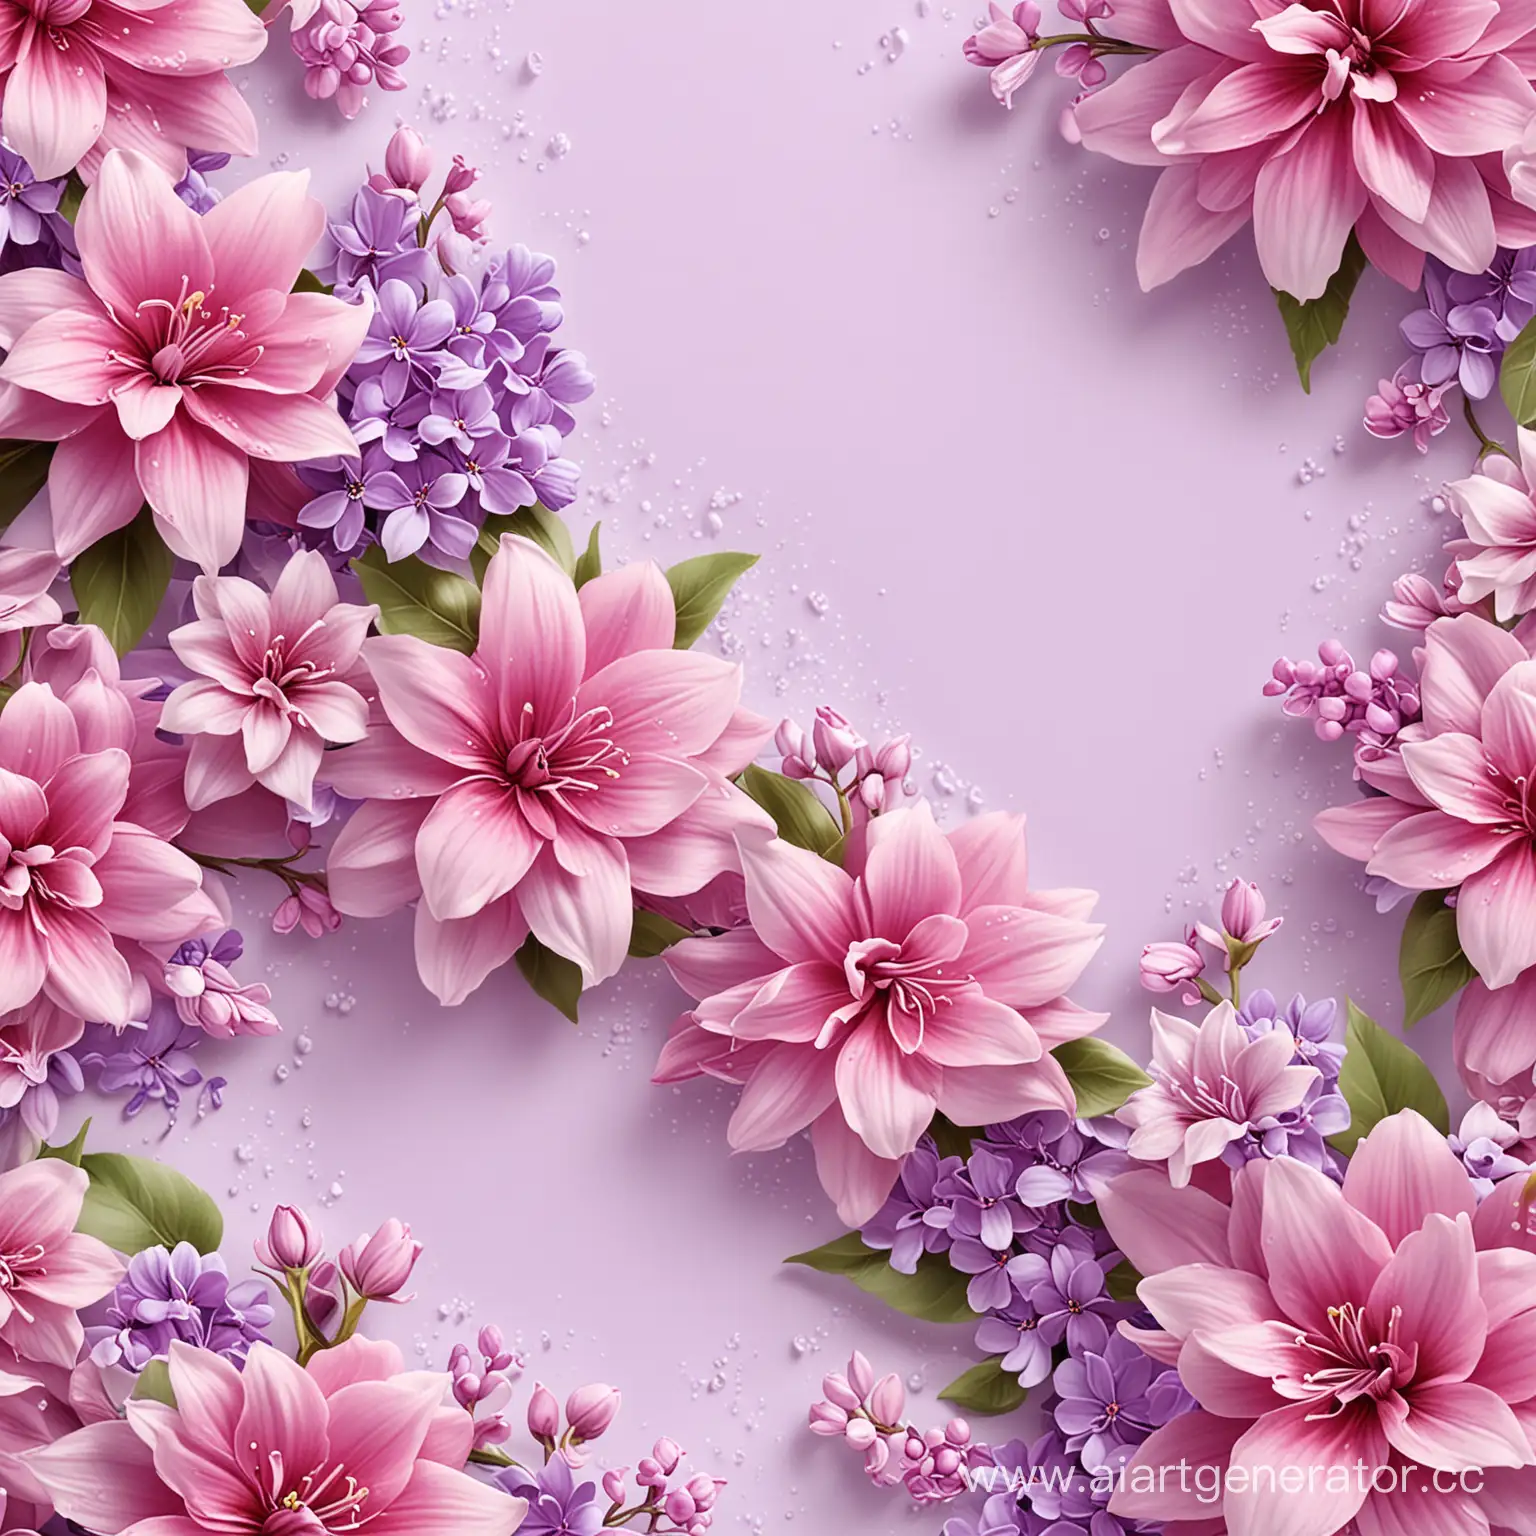 Vibrant-Floral-Design-with-Bright-Pink-and-Lilac-Tones